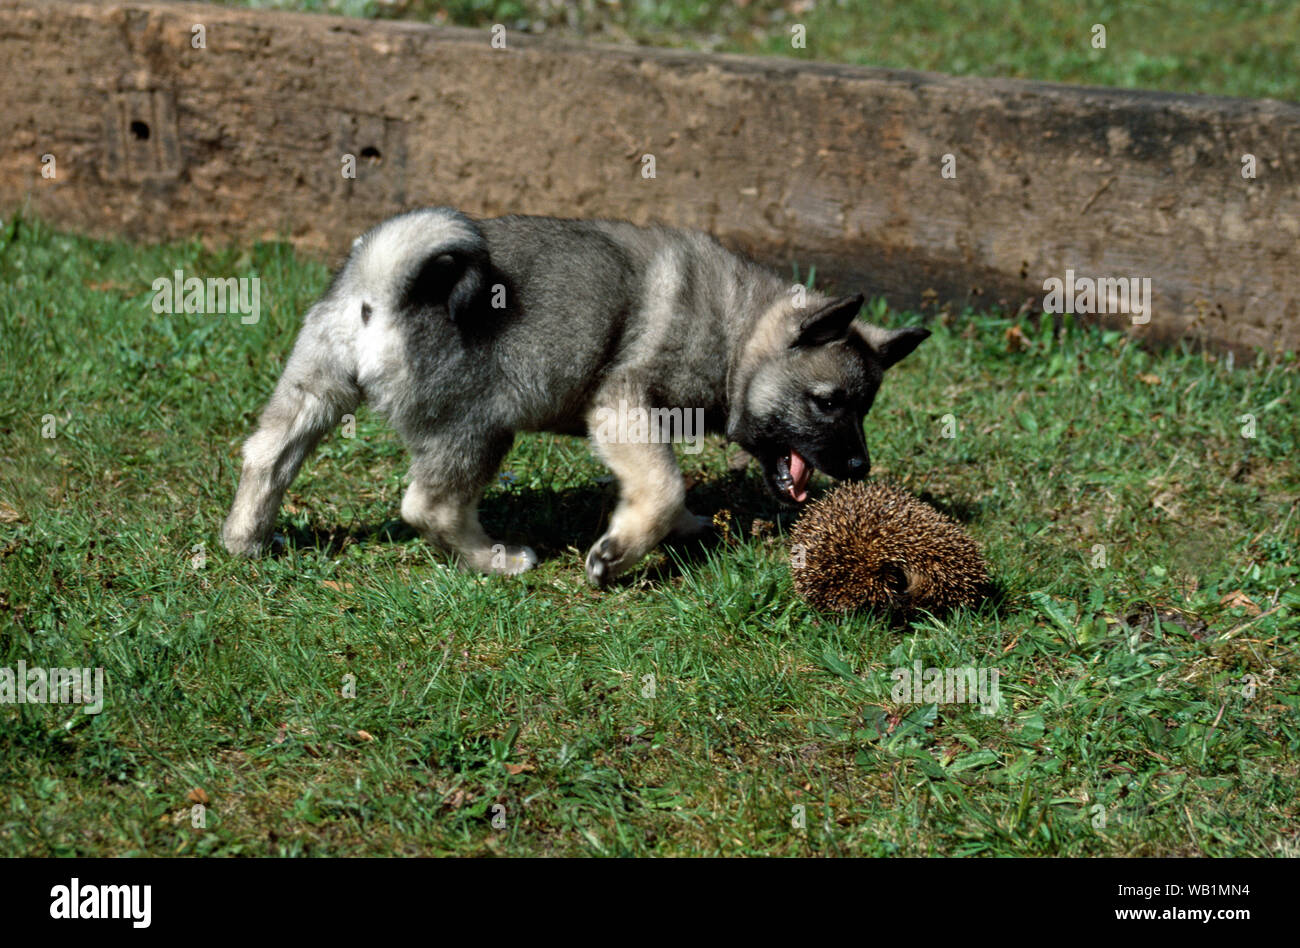 ELKHOUND nine-week old young puppy investigating a rolled up Hedgehog, in a defensive position. Stock Photo